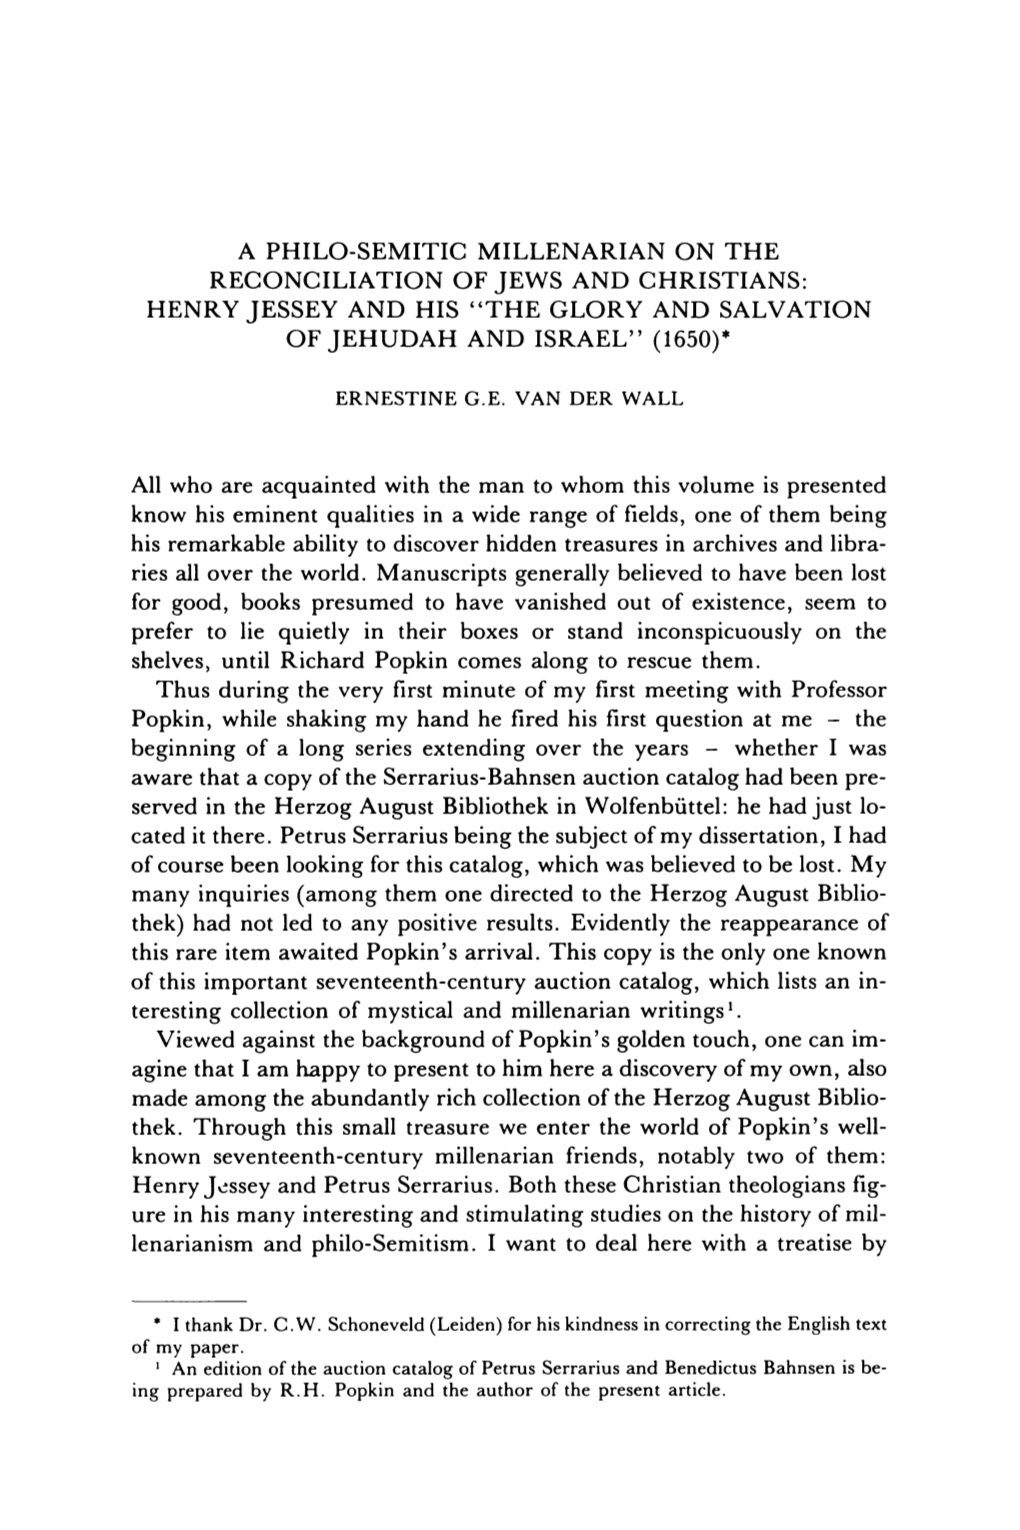 A Philo-Semitic Millenarian on the Reconciliation of Jews and Christians: Henry Jessey and His "The Glory and Salvation of Jehudah and Israel" (1650)*